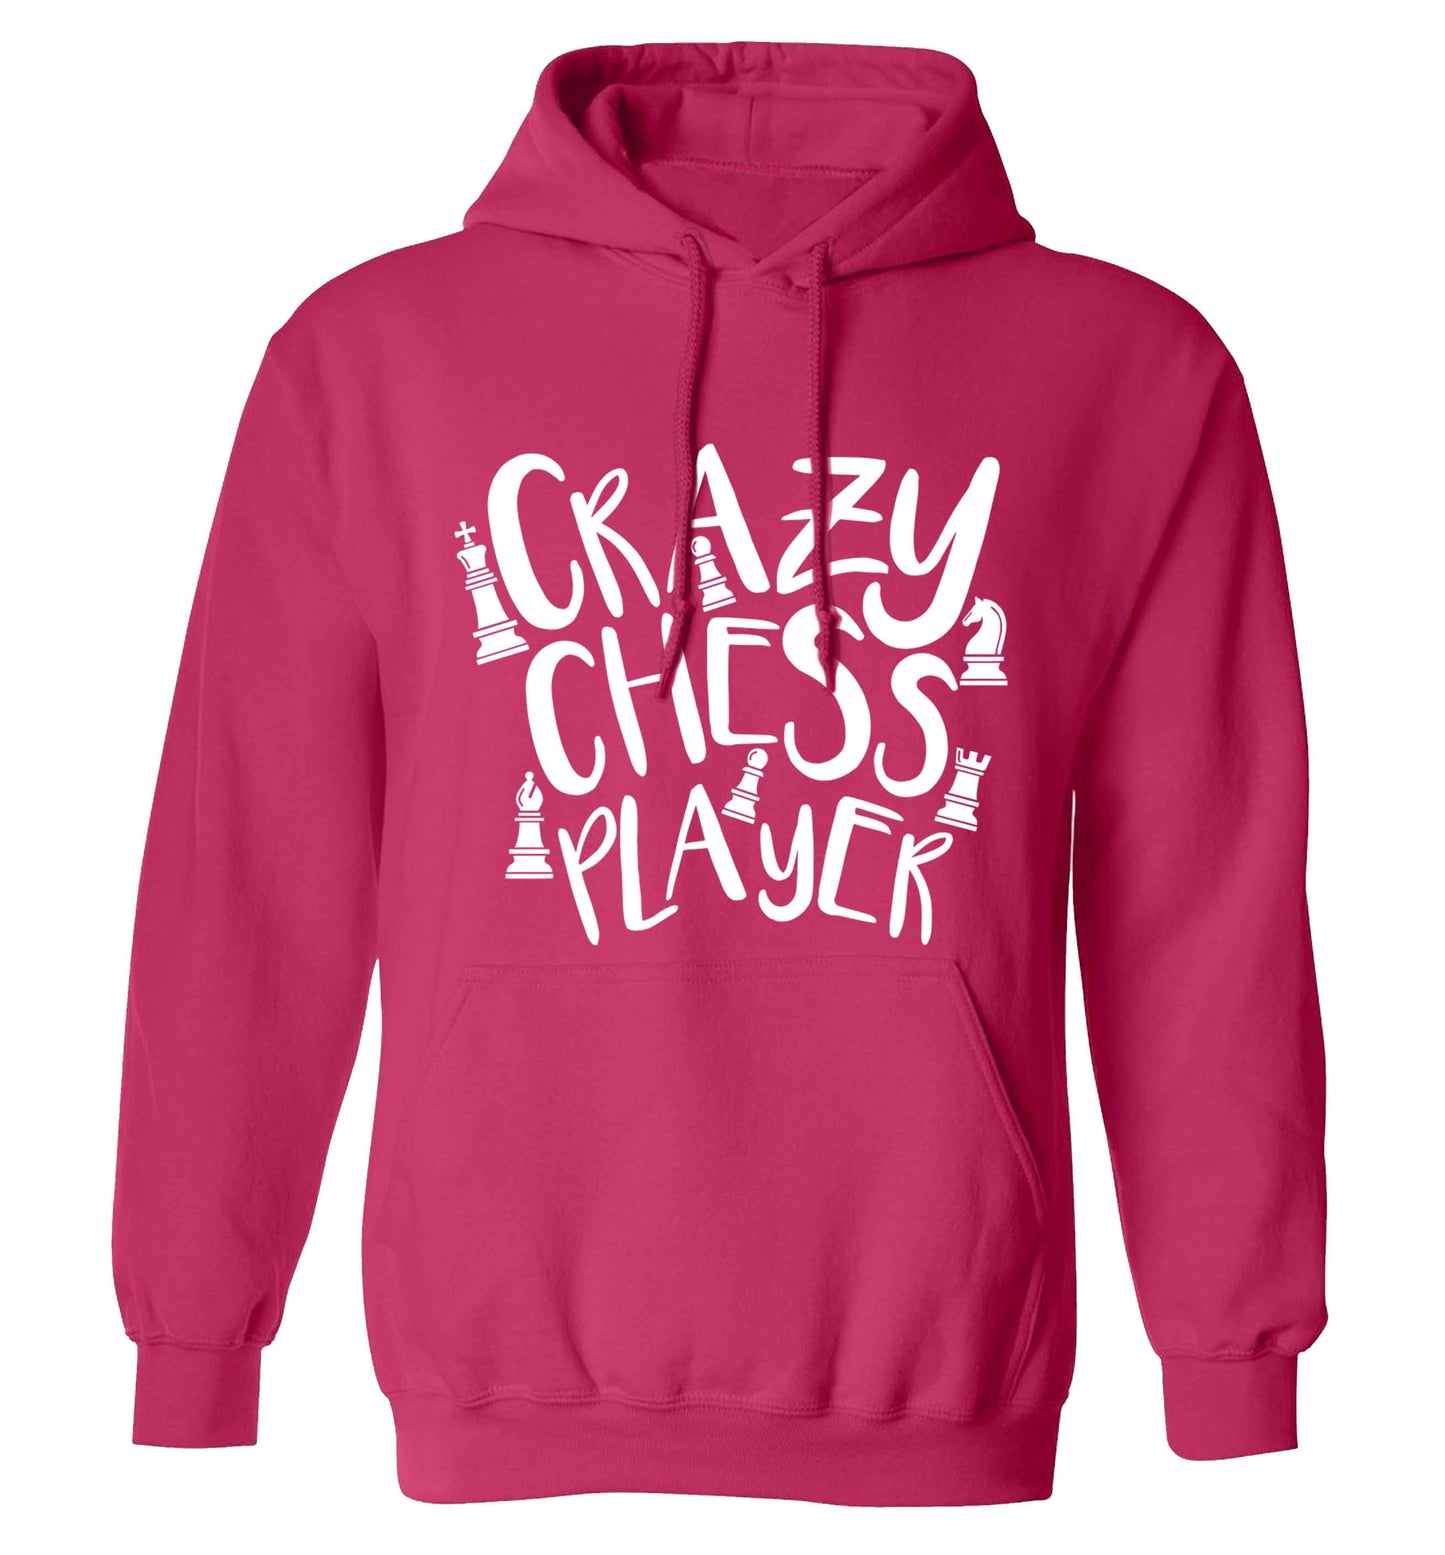 Crazy chess player adults unisex pink hoodie 2XL